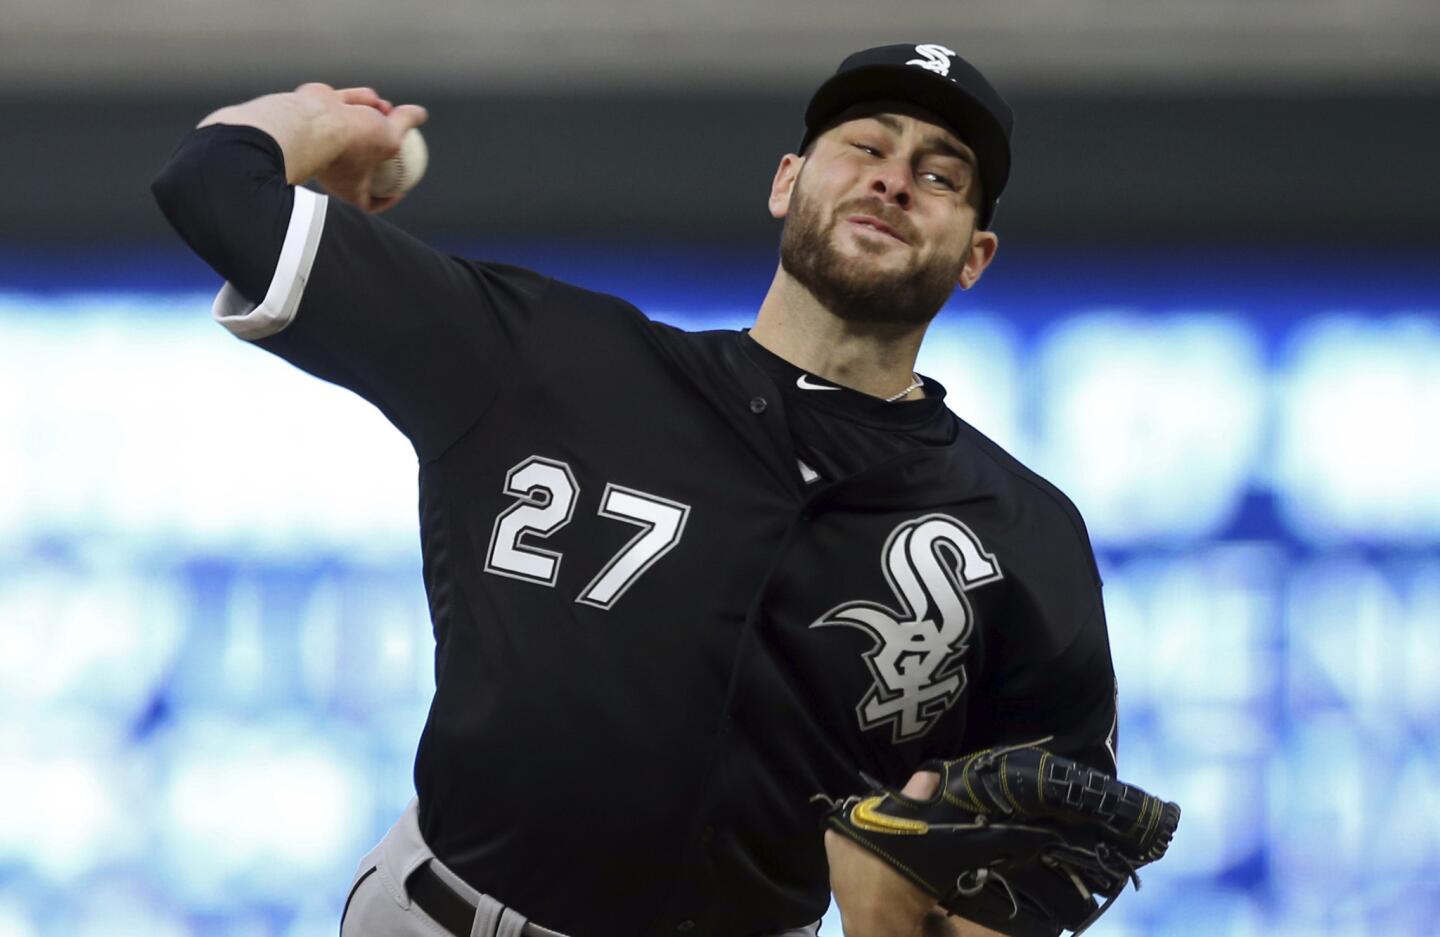 White Sox starter Lucas Giolito pitches against the Twins during the first inning Thursday, April 12, 2018, in Minneapolis.